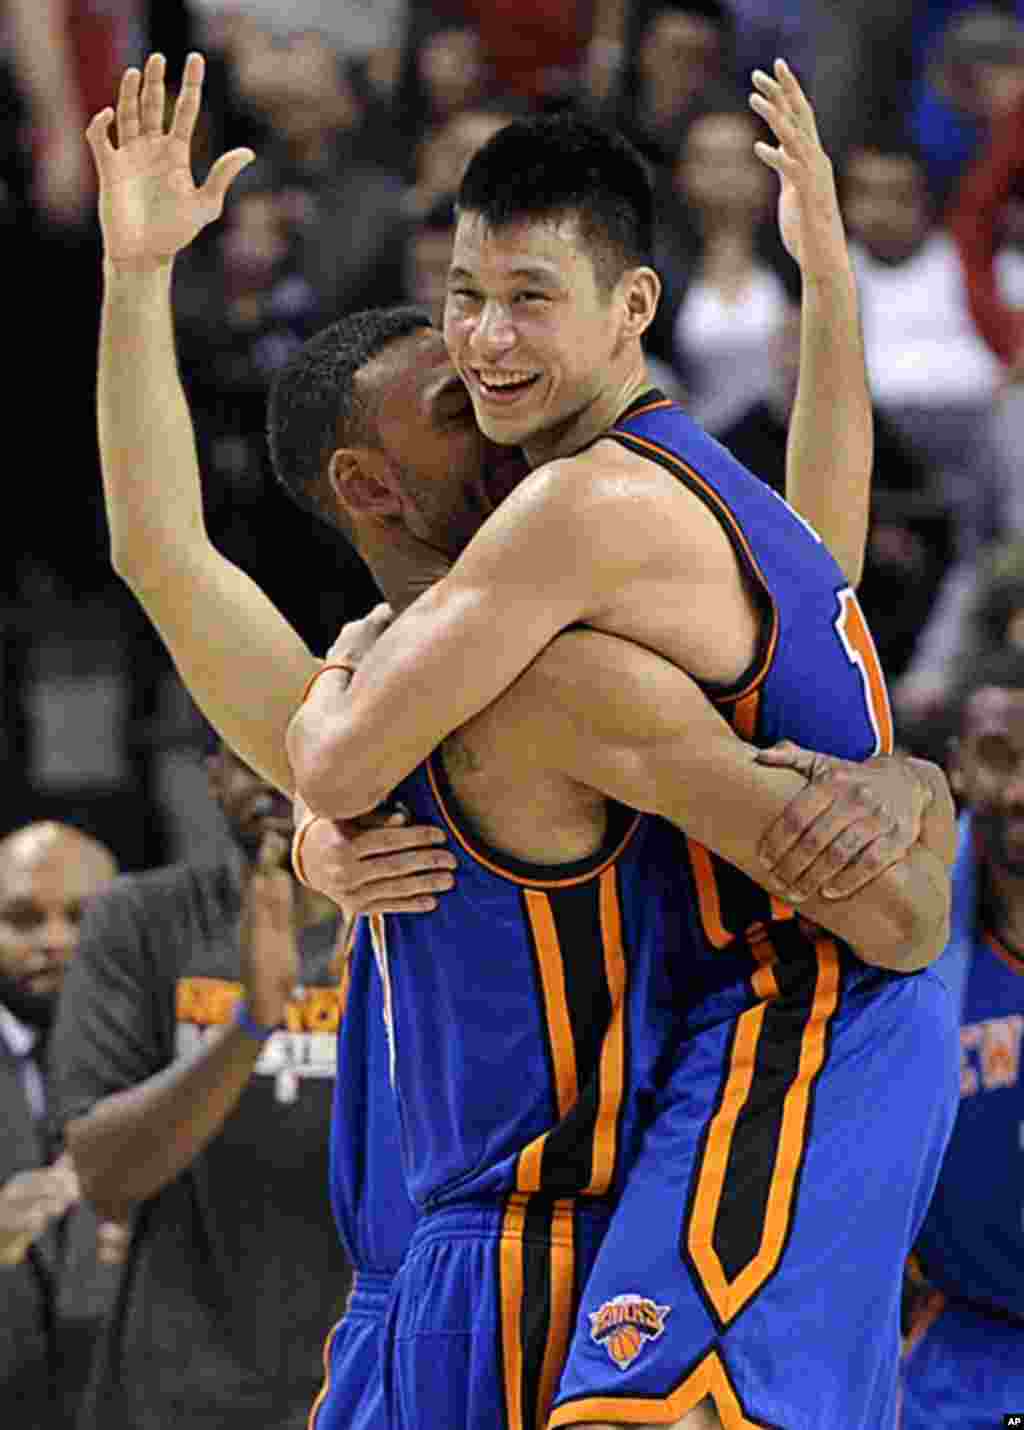 New York Knicks guard Jeremy Lin (R) and Jared Jeffries celebrate their win against the Toronto Raptors during the second half of their NBA basketball game in Toronto February 14, 2012. (REUTERS)